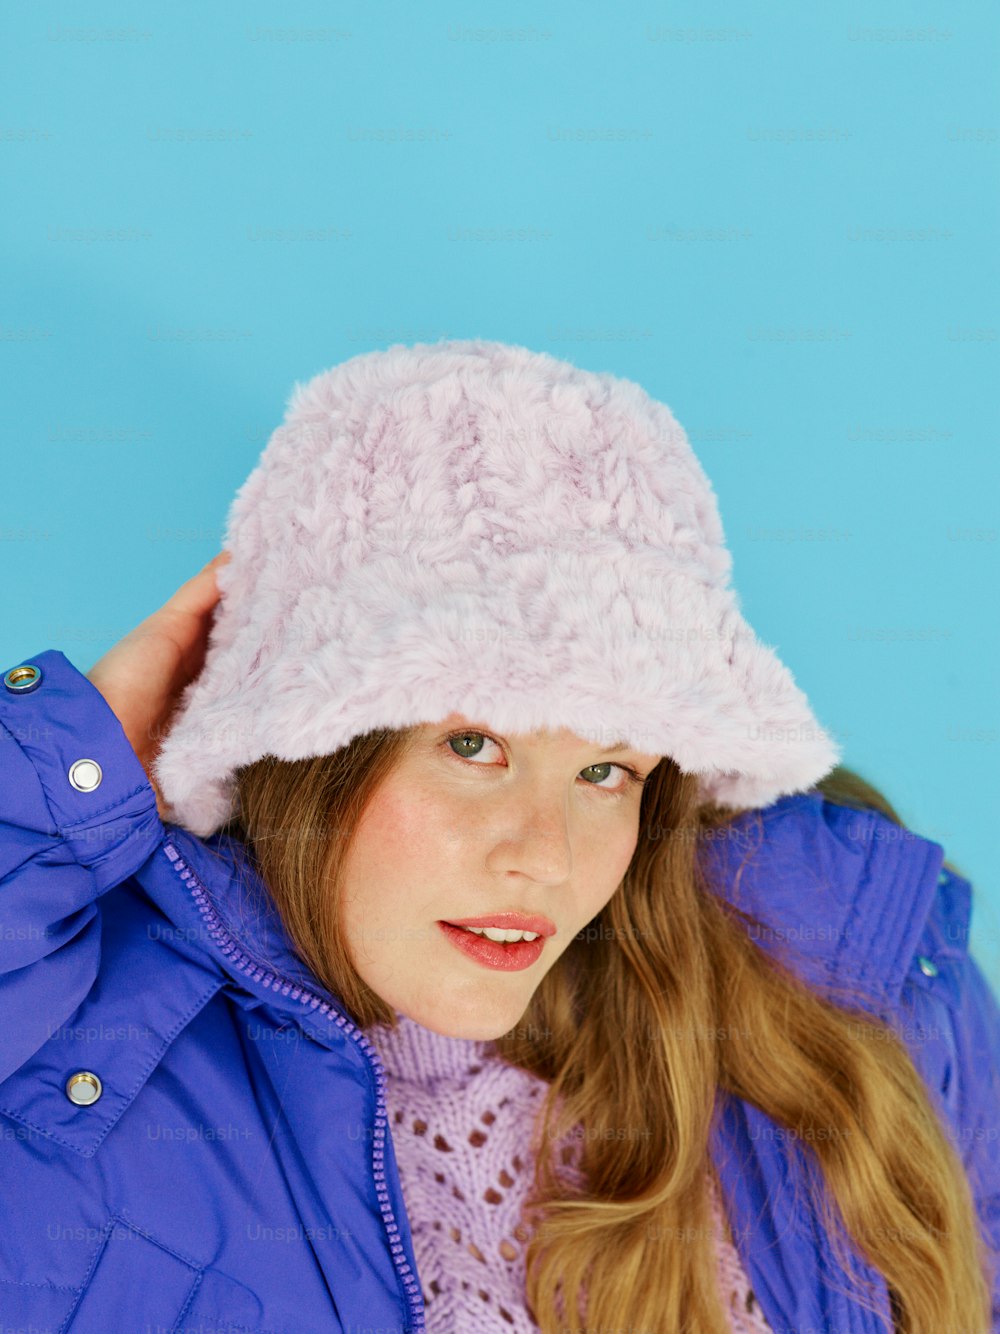 a young girl wearing a pink hat and purple jacket